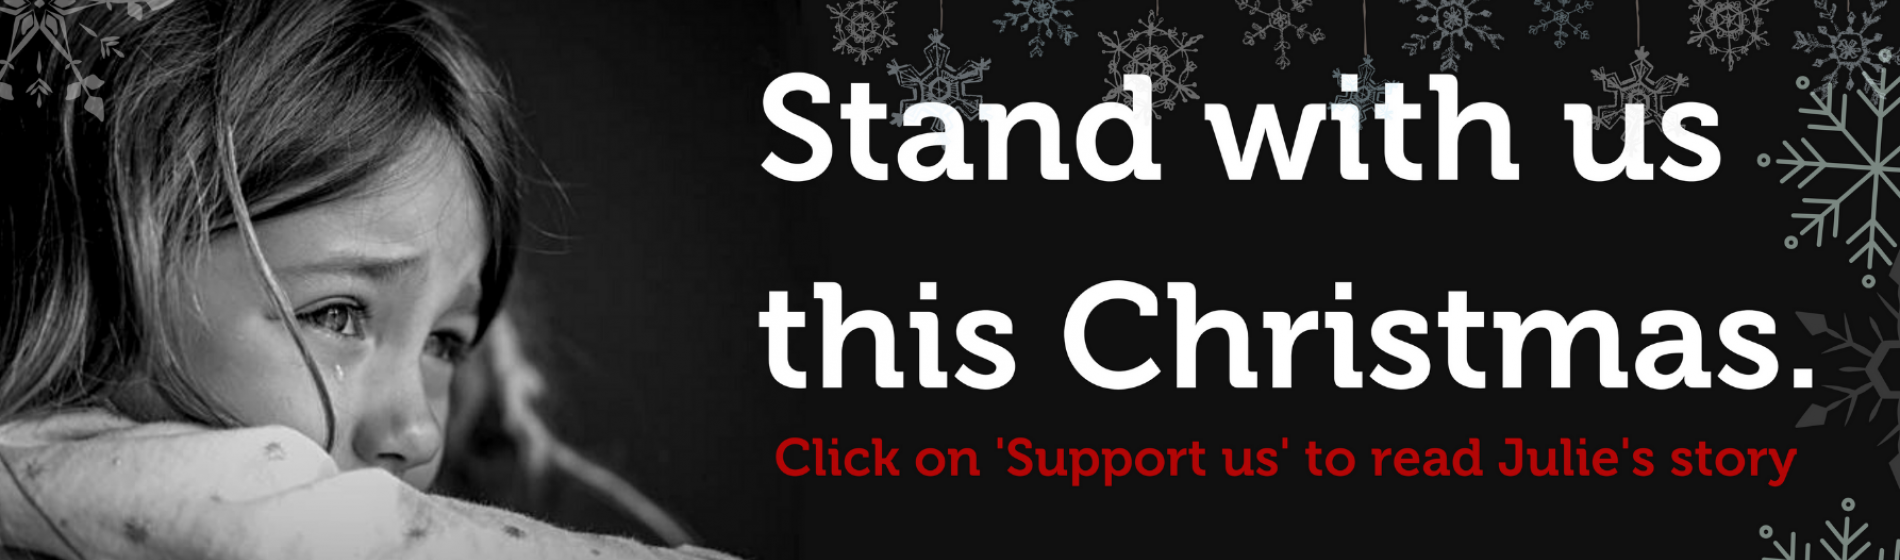 Julie  looking upset - Stand with Us this Christmas